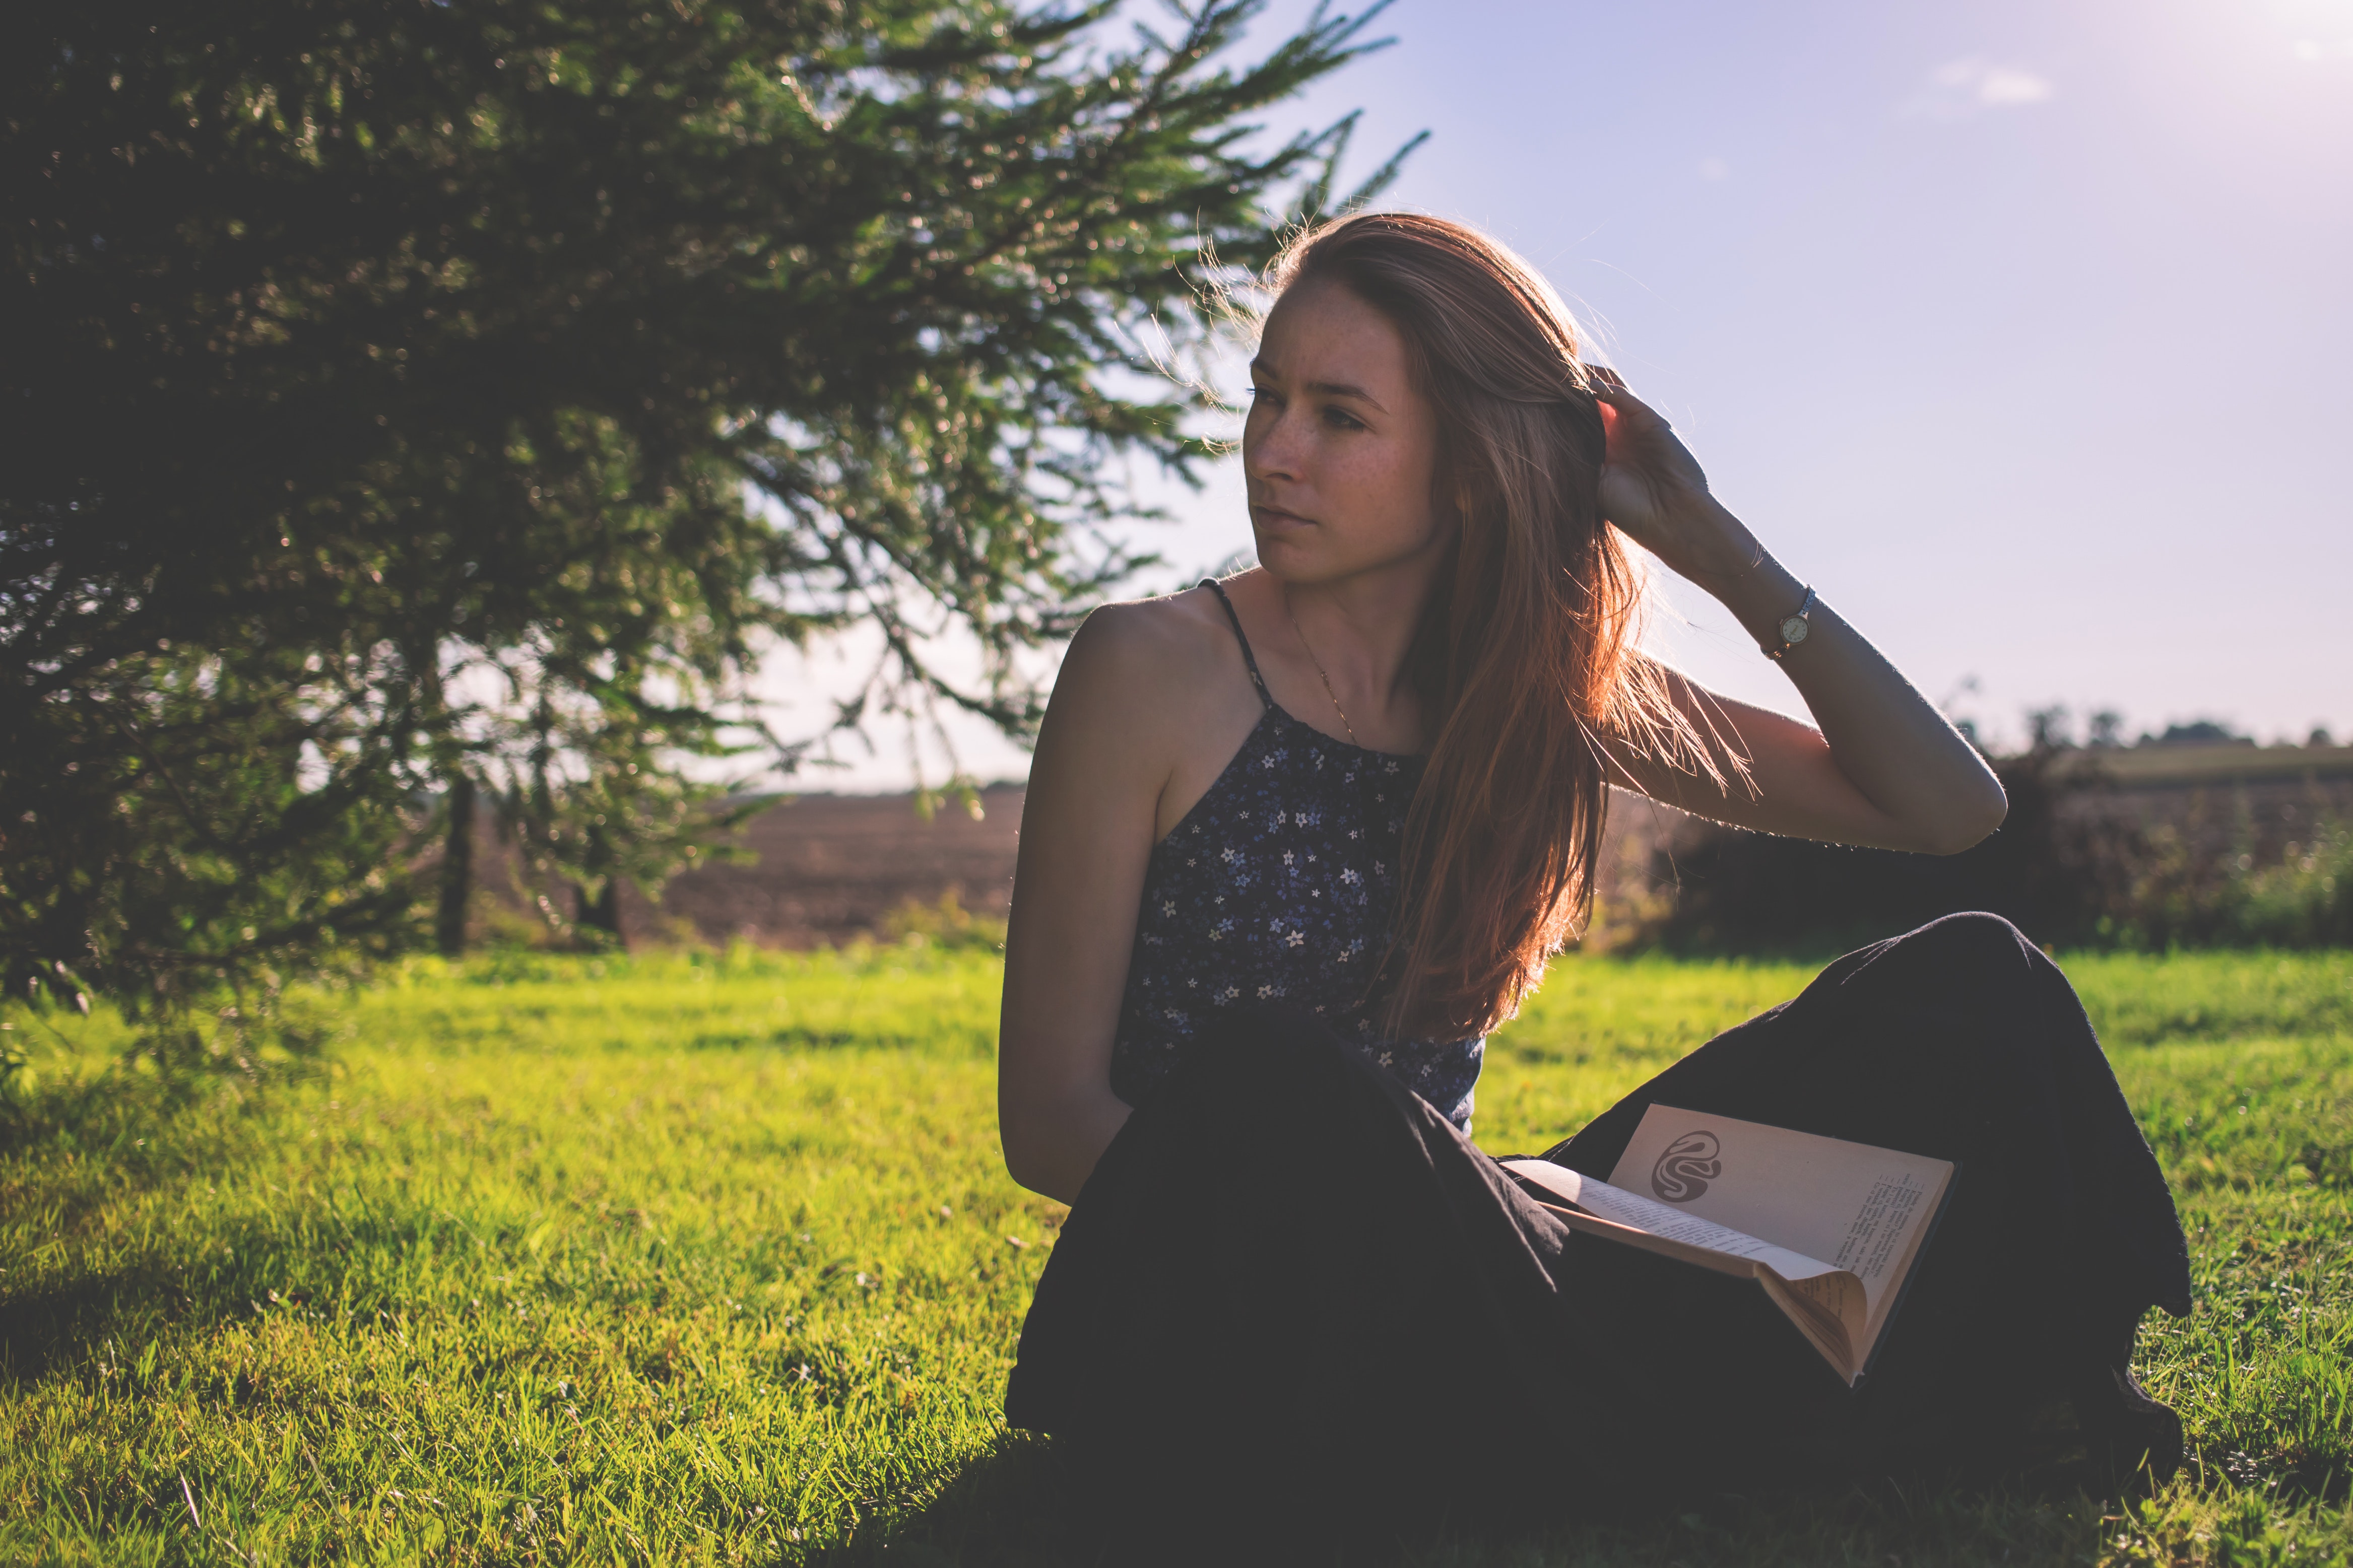 Woman in black tank top and holding brown book sitting on grass under clear sunny sky photo